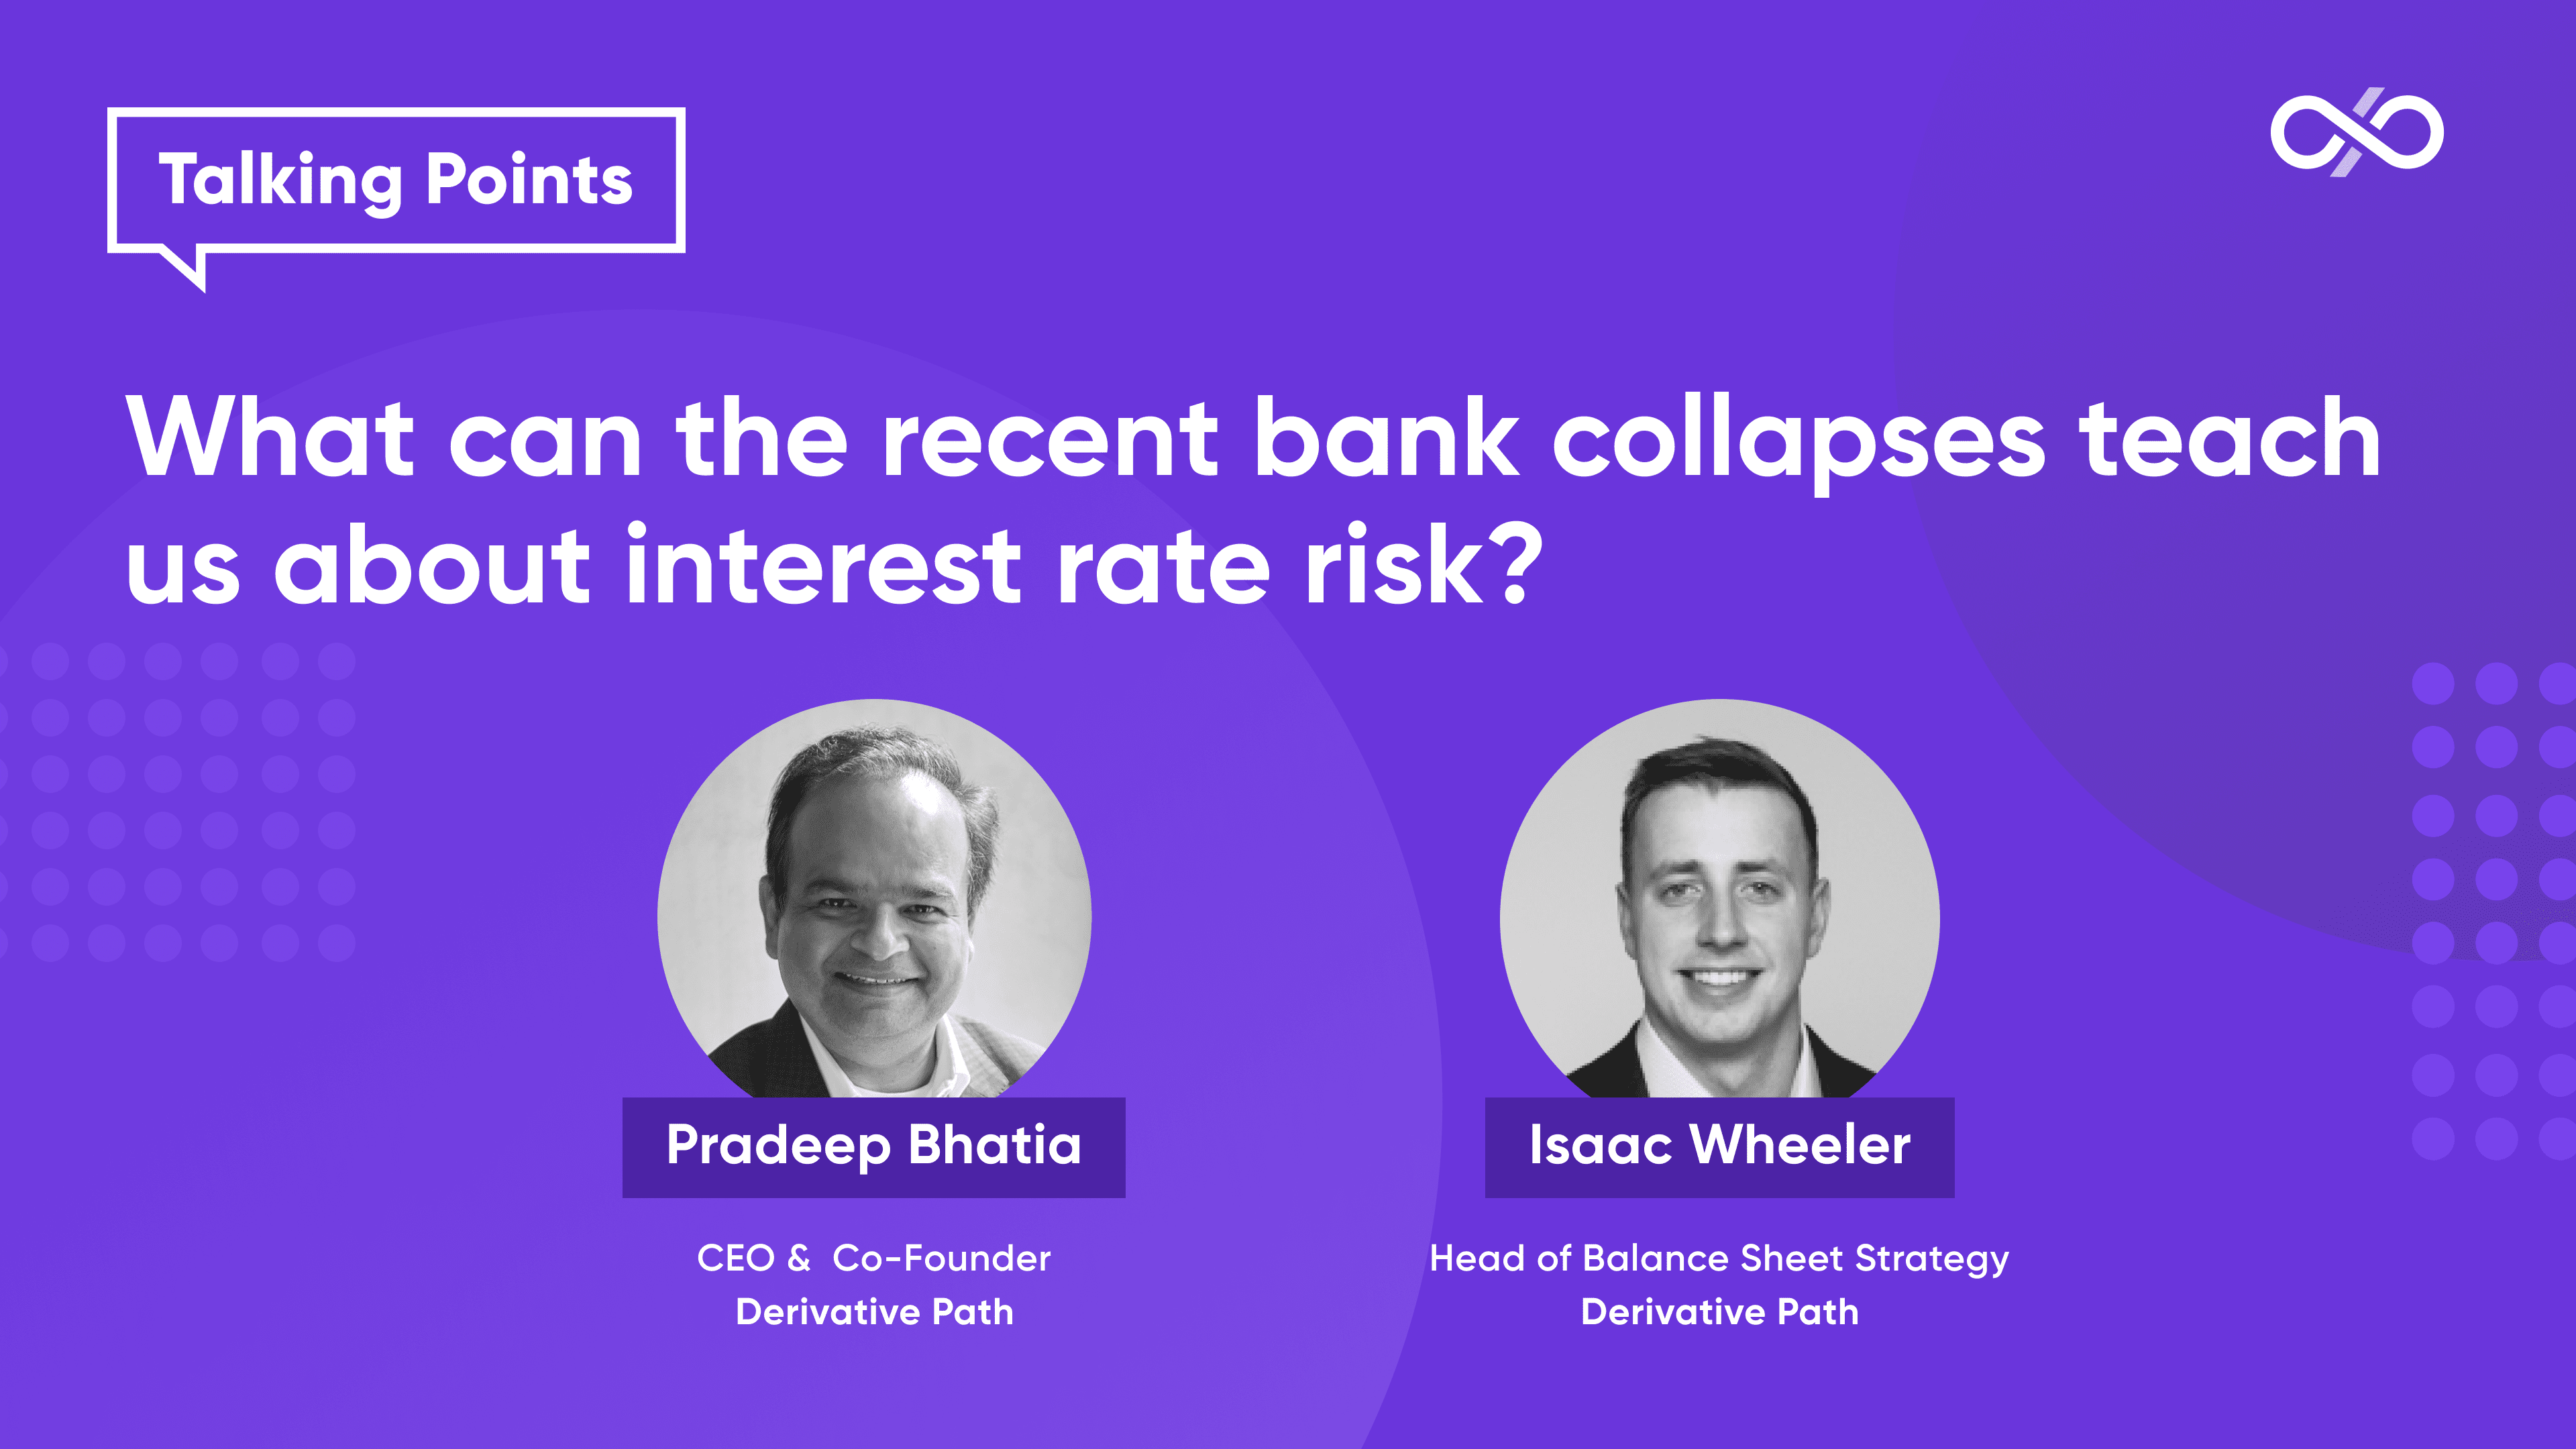 What Can the Recent Bank Collapses Teach Us About Interest Rate Risk?